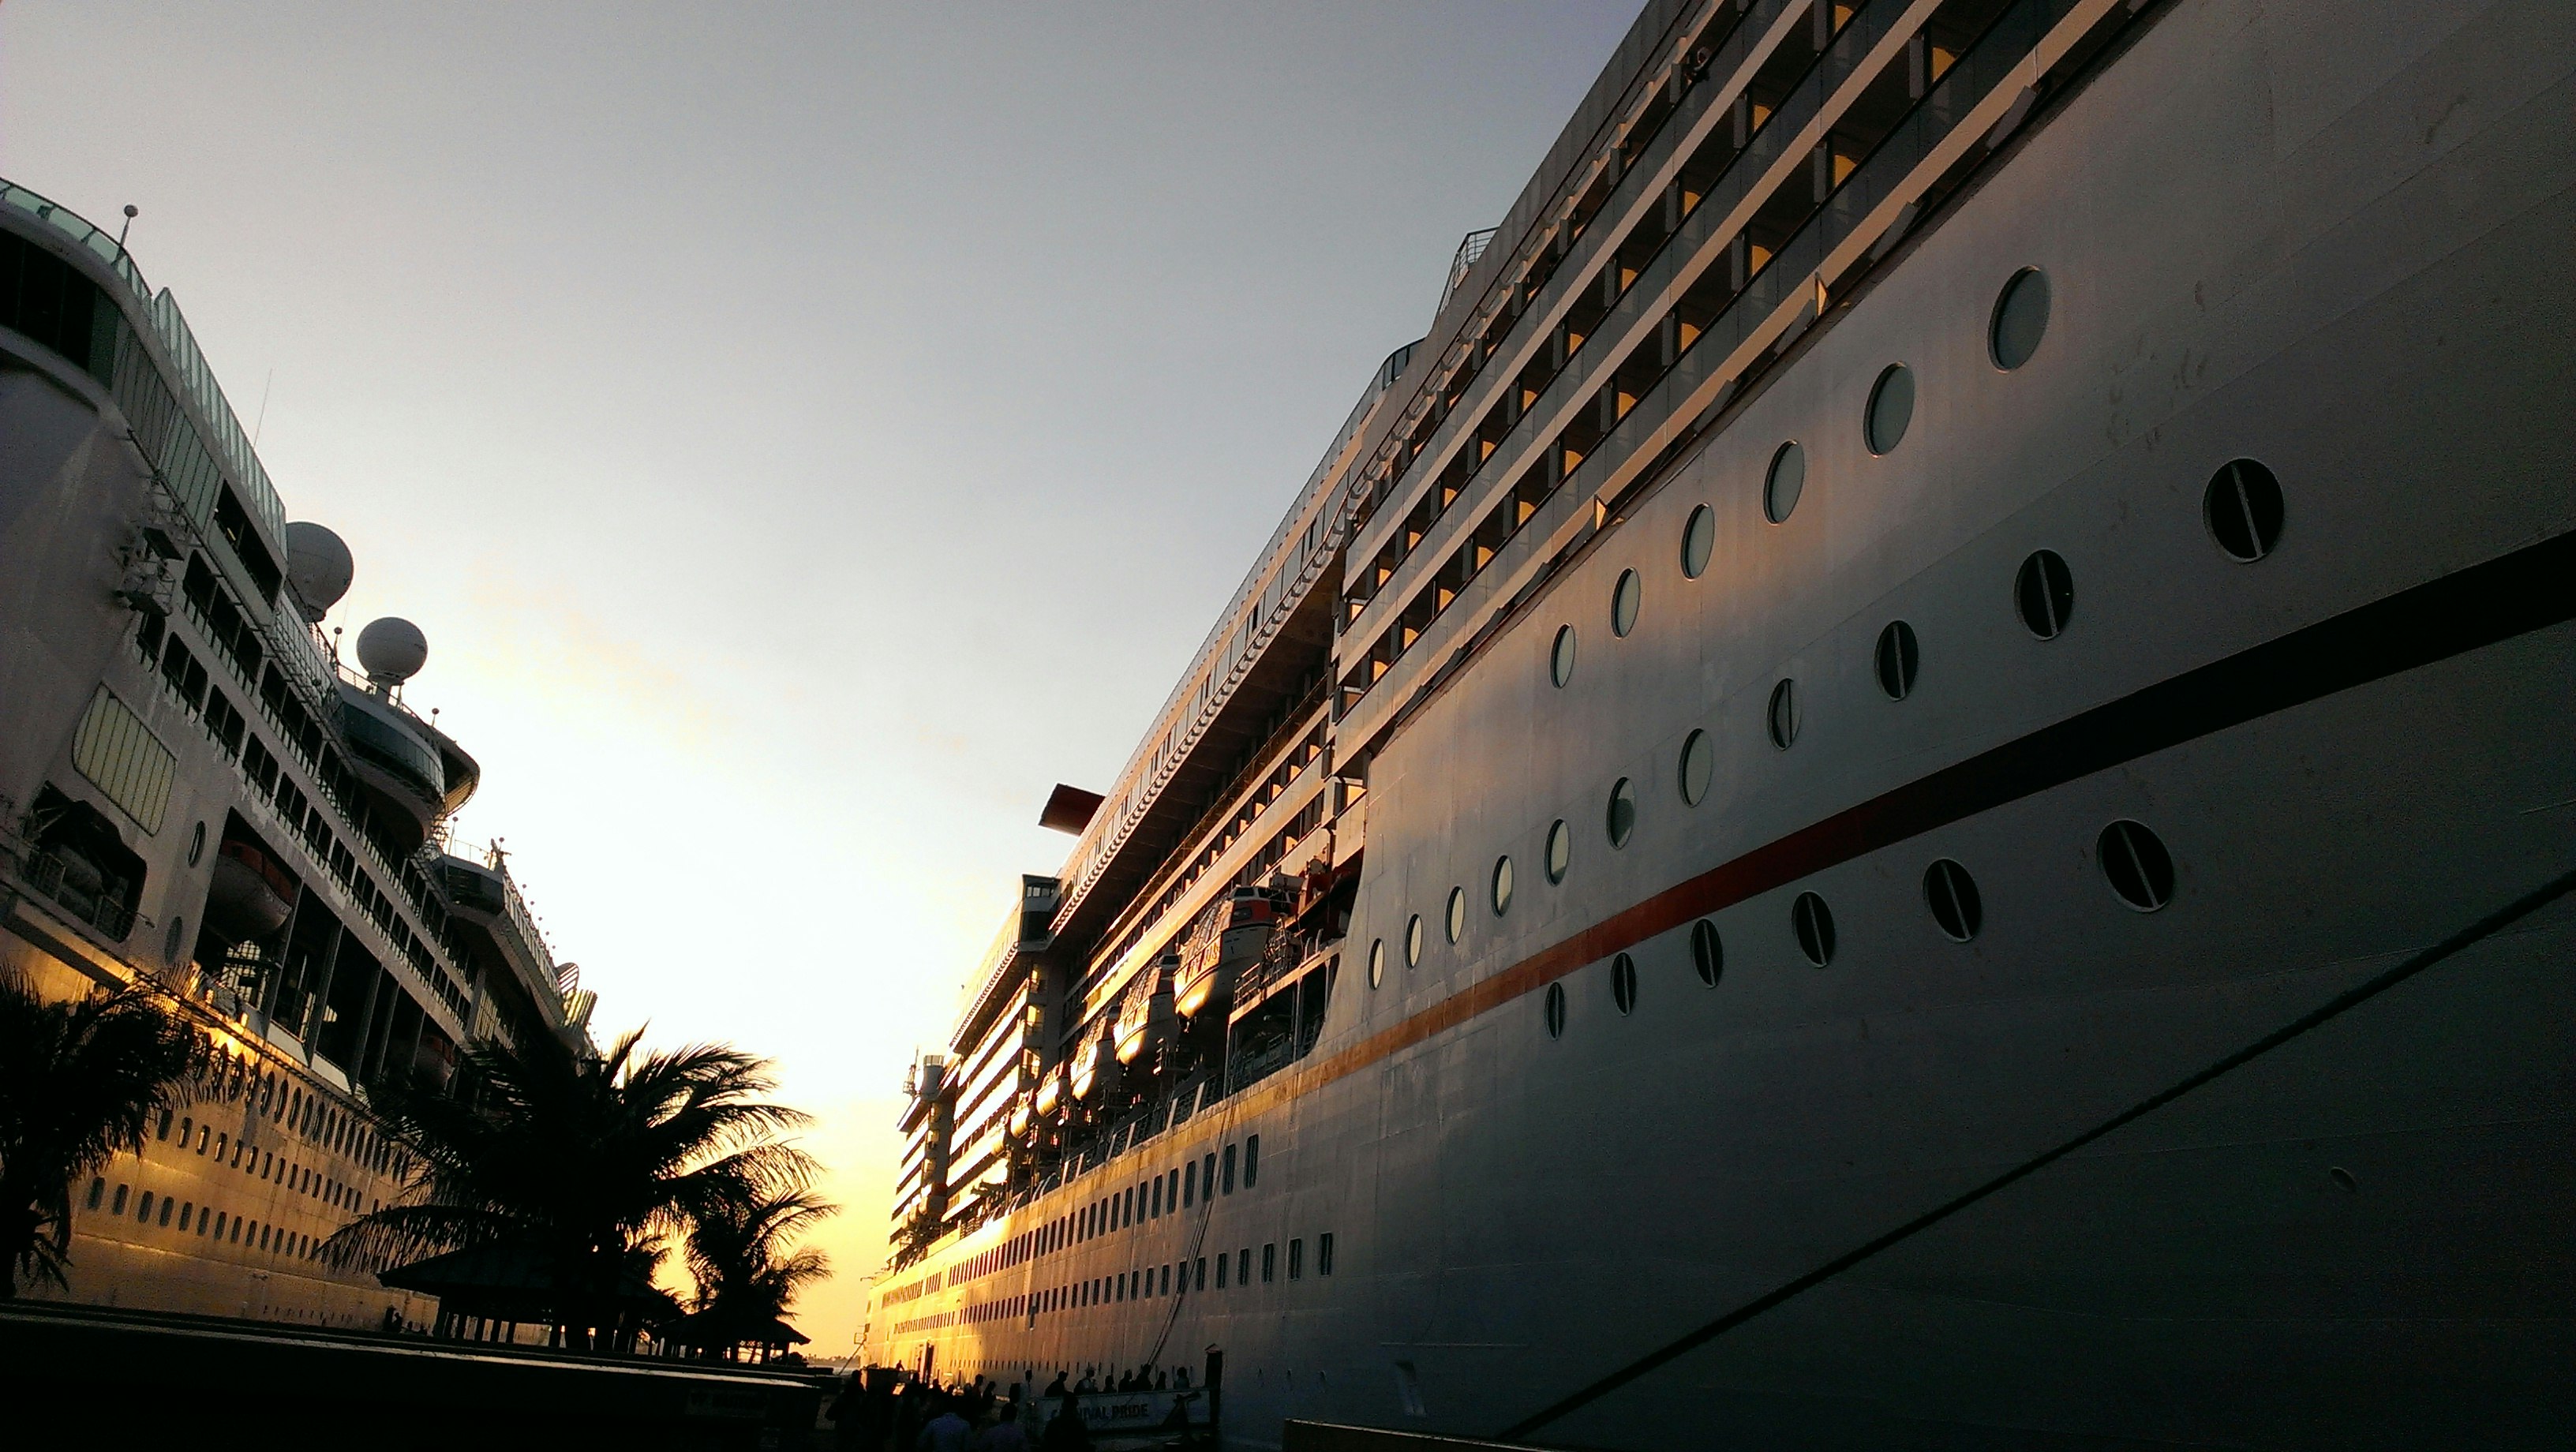 cruise ship docked during golden time